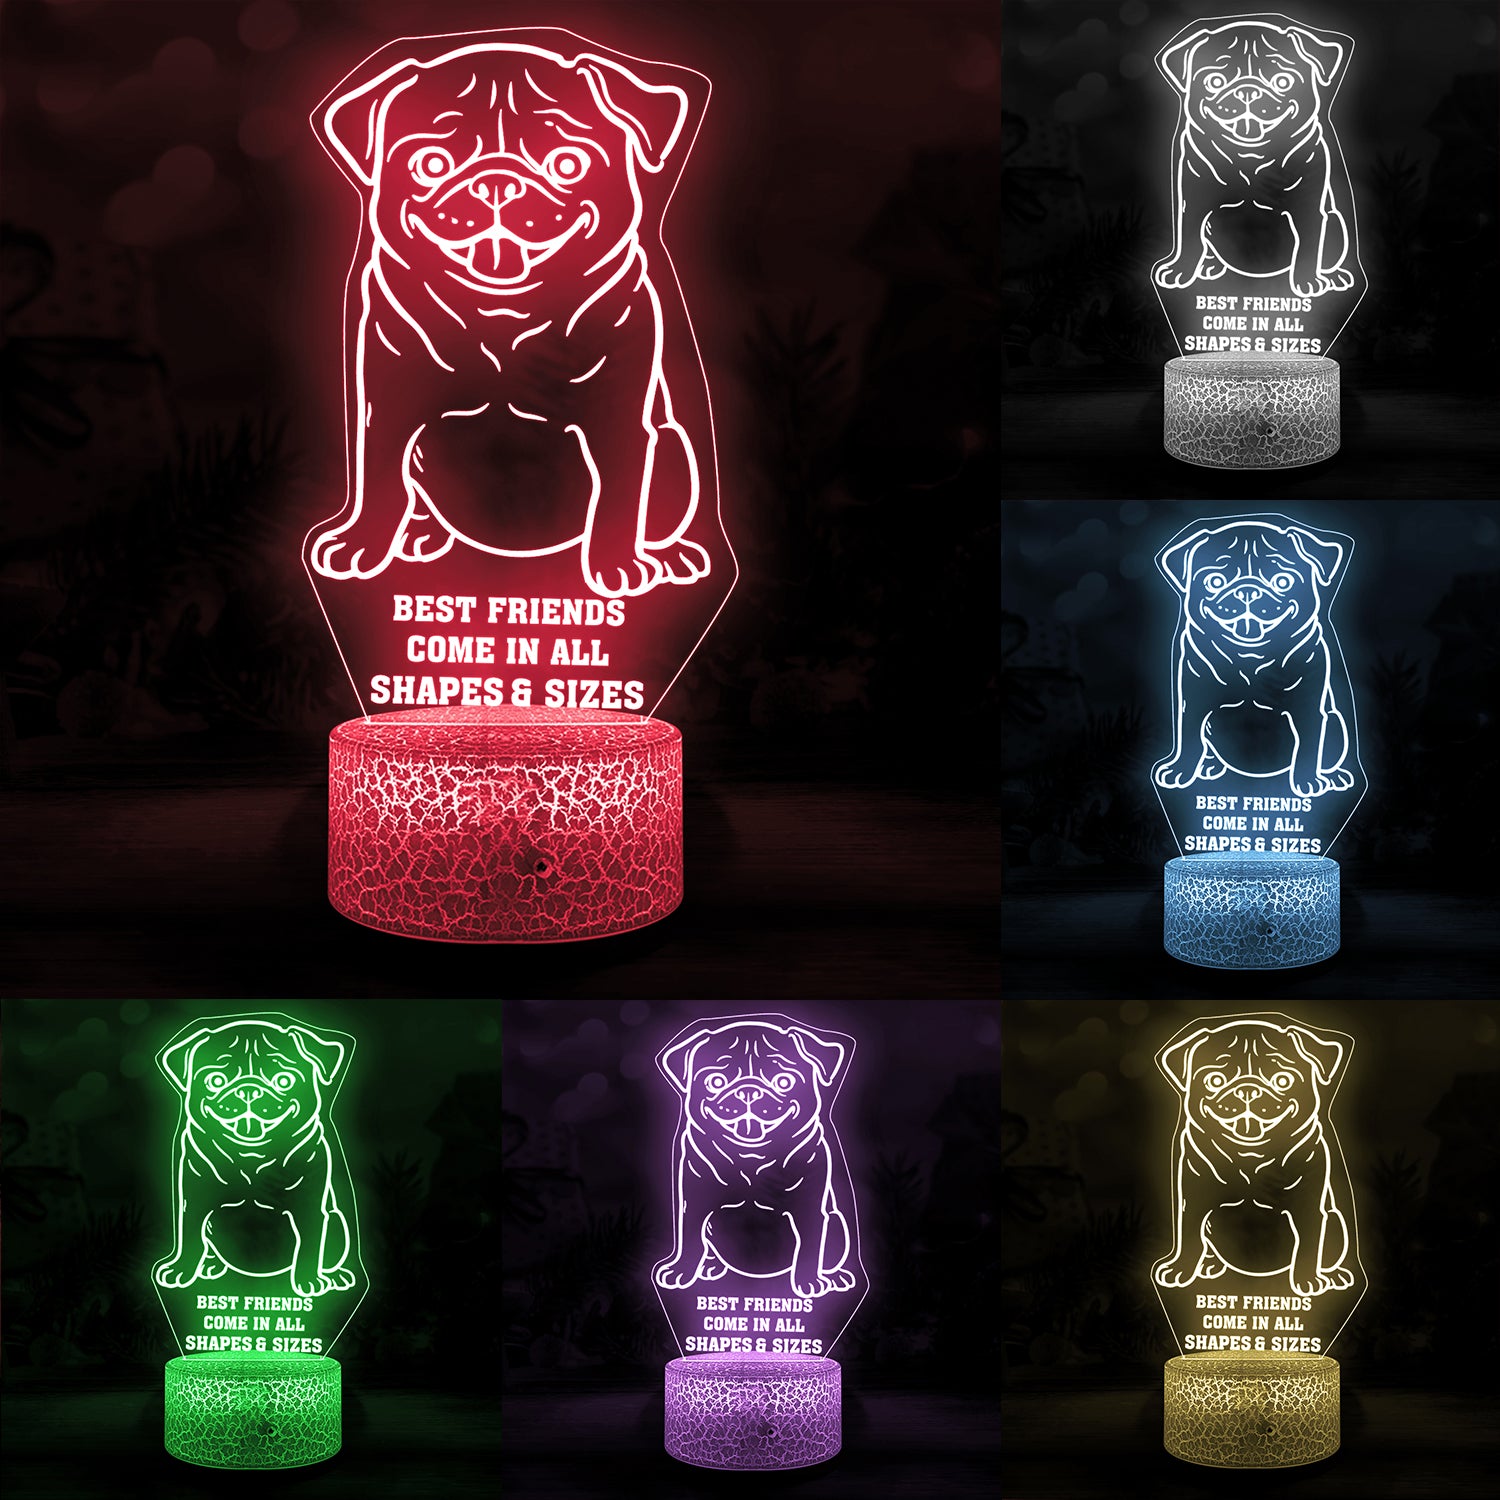 3D Led Light - Dog - Best Friends Come In All Shapes & Sizes - Ukglca34001